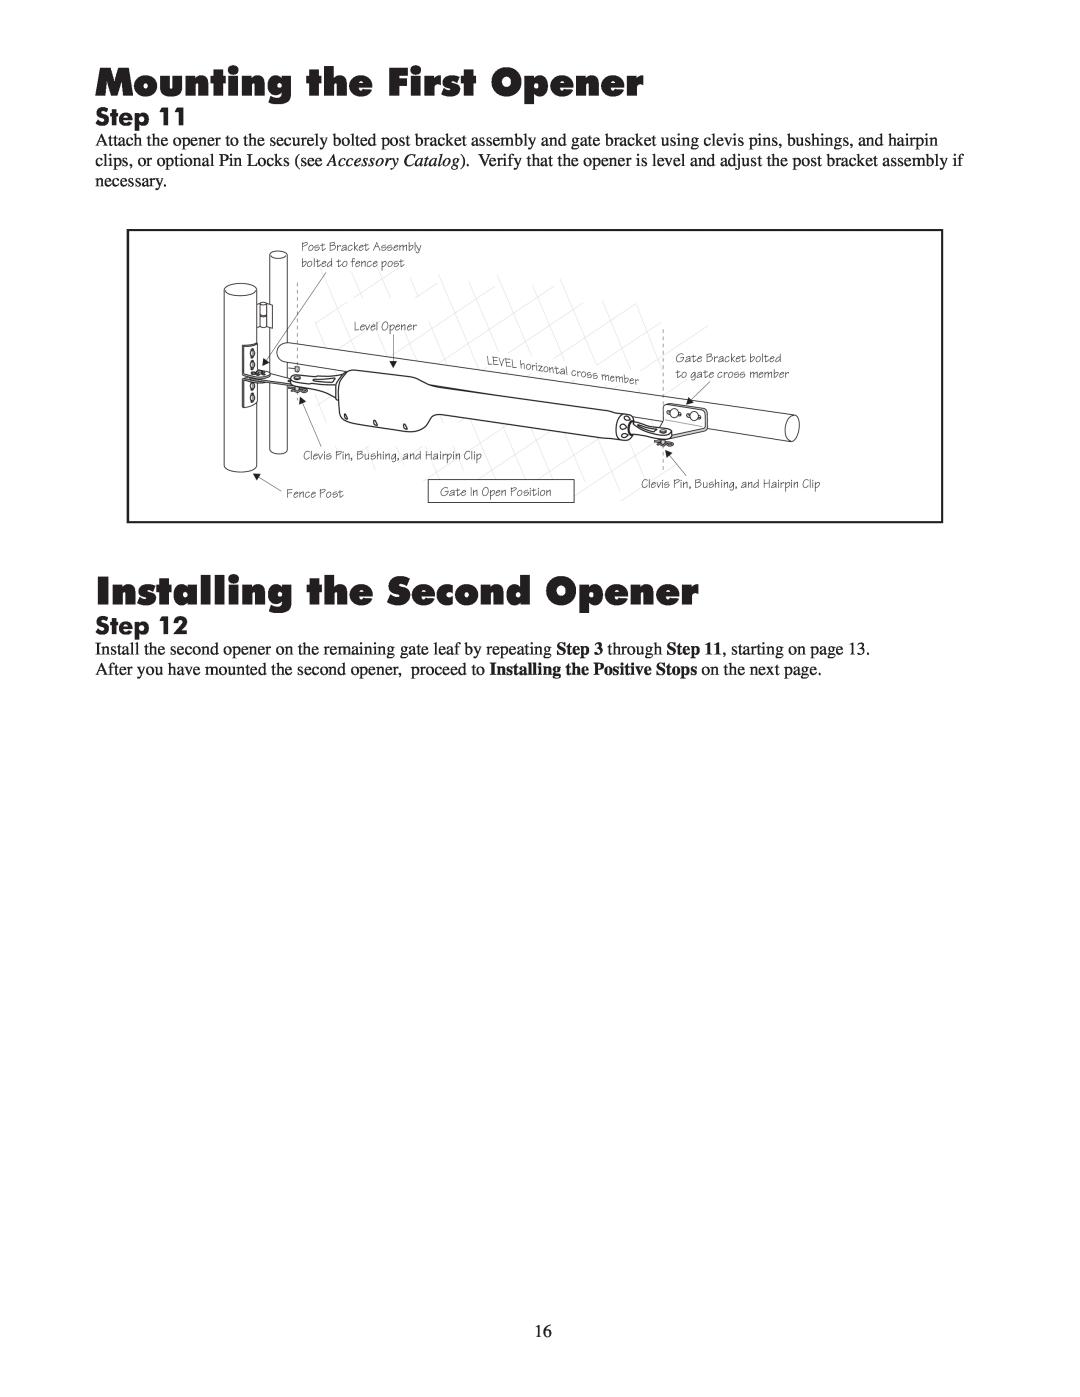 GTO 2550, 2502 installation manual Mounting the First Opener, Installing the Second Opener, Step 